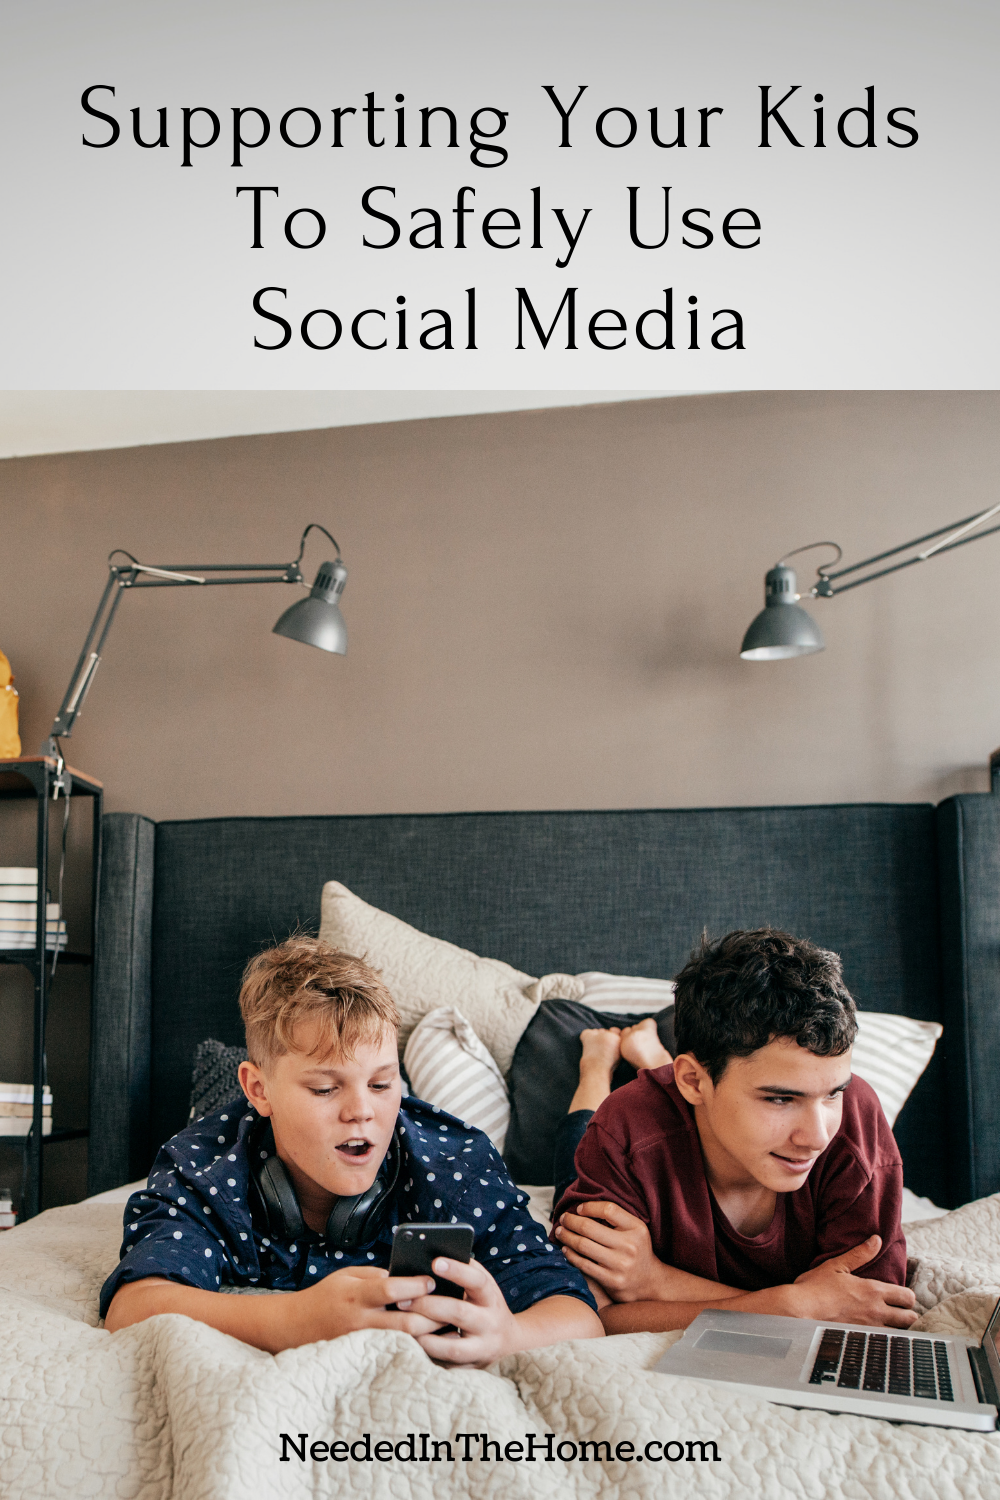 pinterest-pin-description supporting your kids to safely use social media two teen boys laying on bed using smartphone and laptop on social media neededinthehome